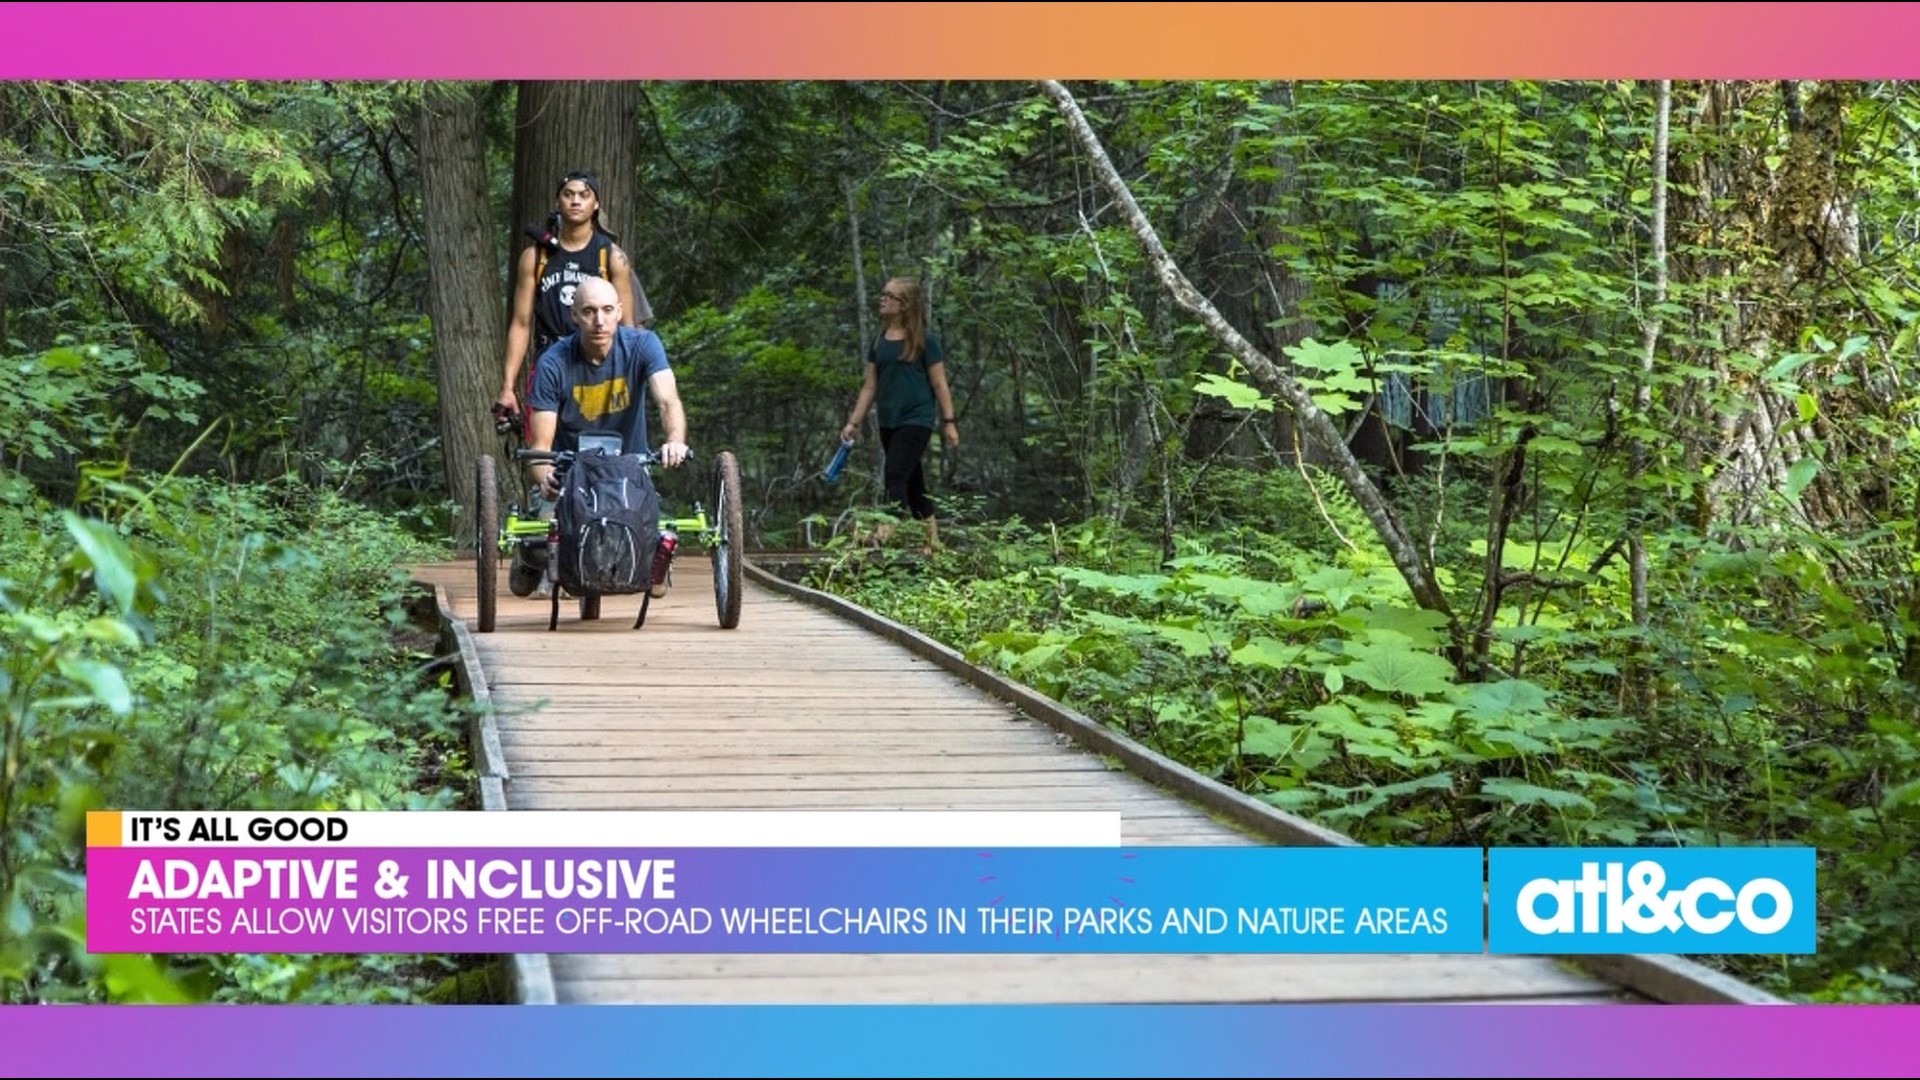 Parks departments across the country are beginning to offer free all-terrain wheelchairs at their visitor centers for disabled people to explore nature.